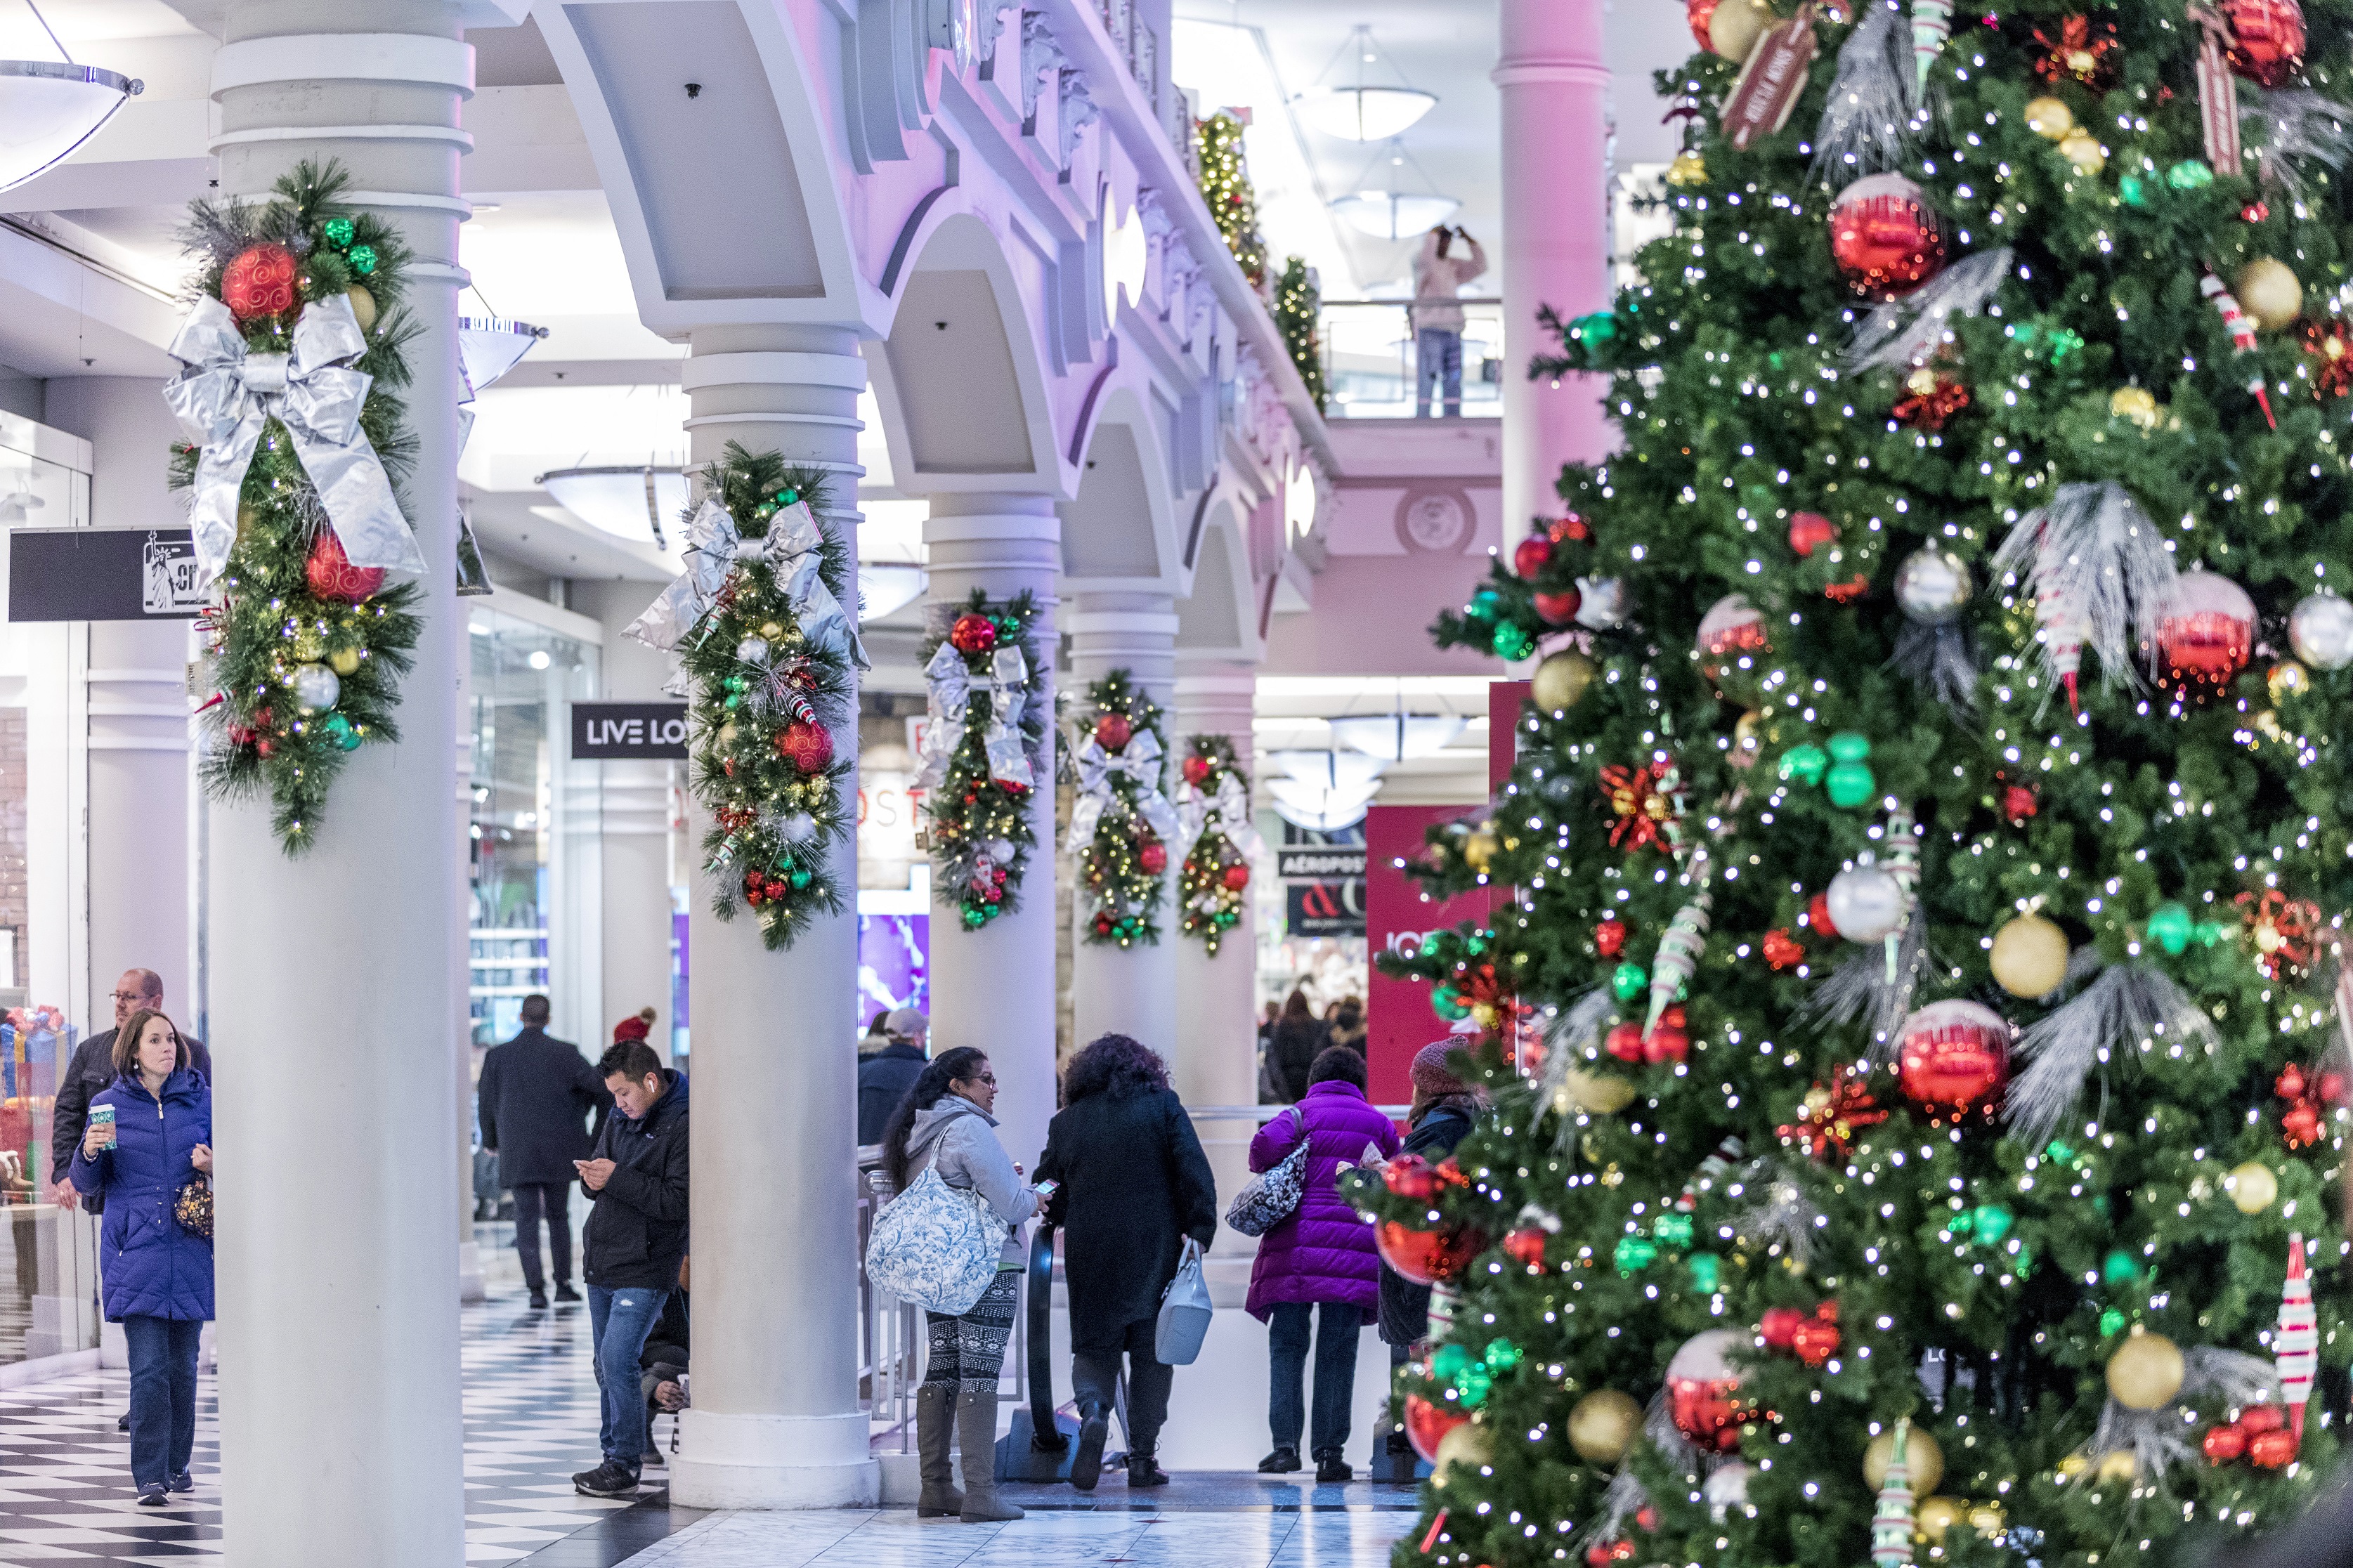 Holiday cheer resonates through the great hall of this shopping center sparking joy and excitement for visitors big and small.